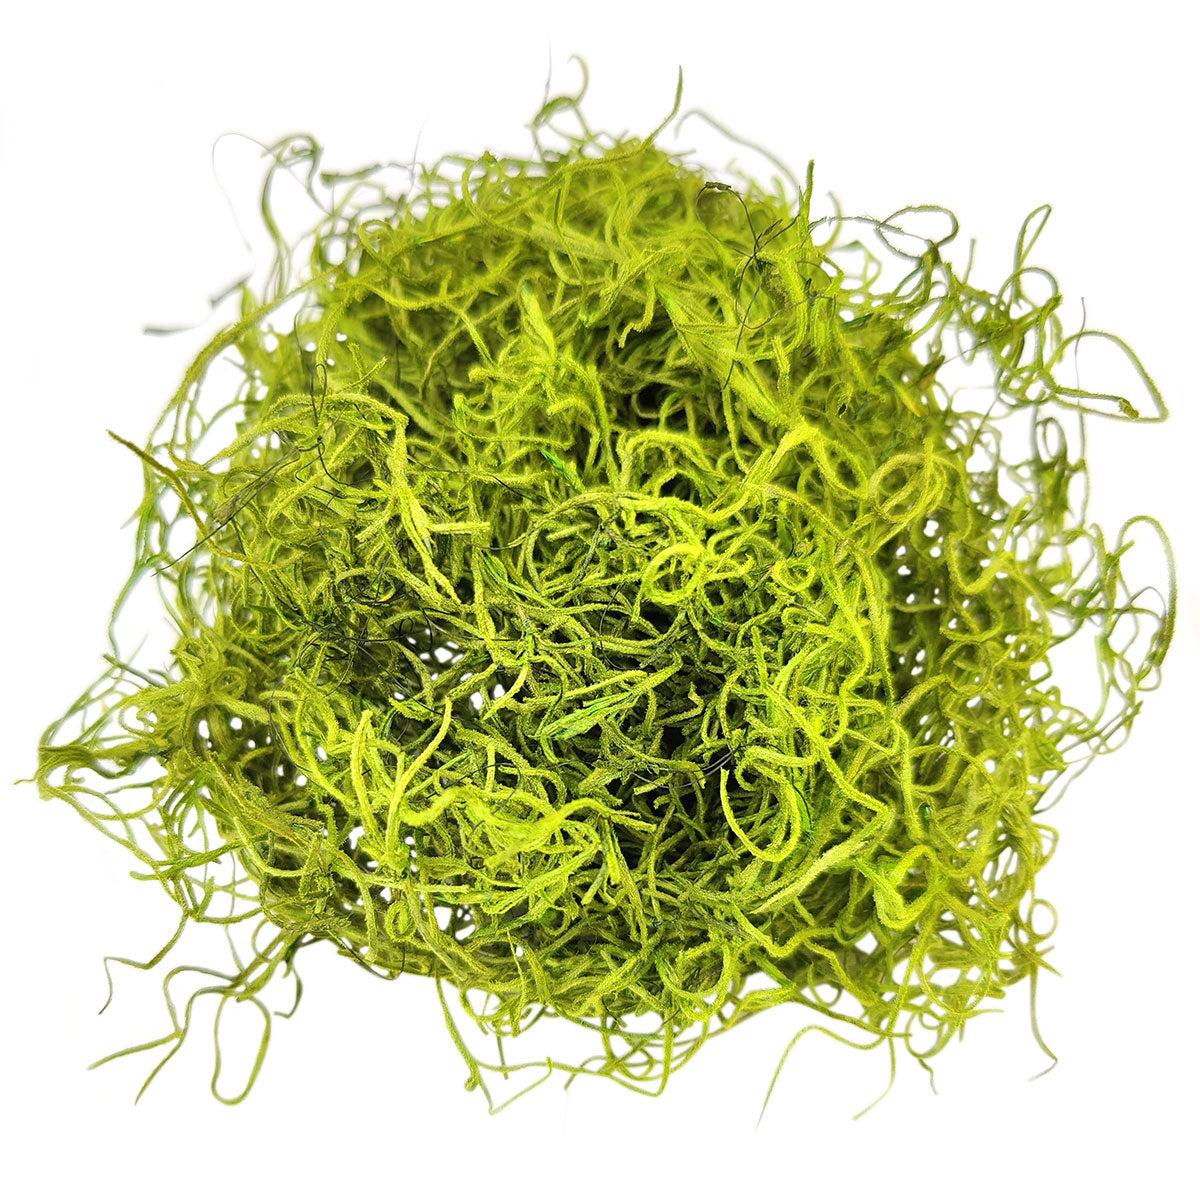 10OZ Fake Moss Artificial Moss for Potted Plants Greenery Moss